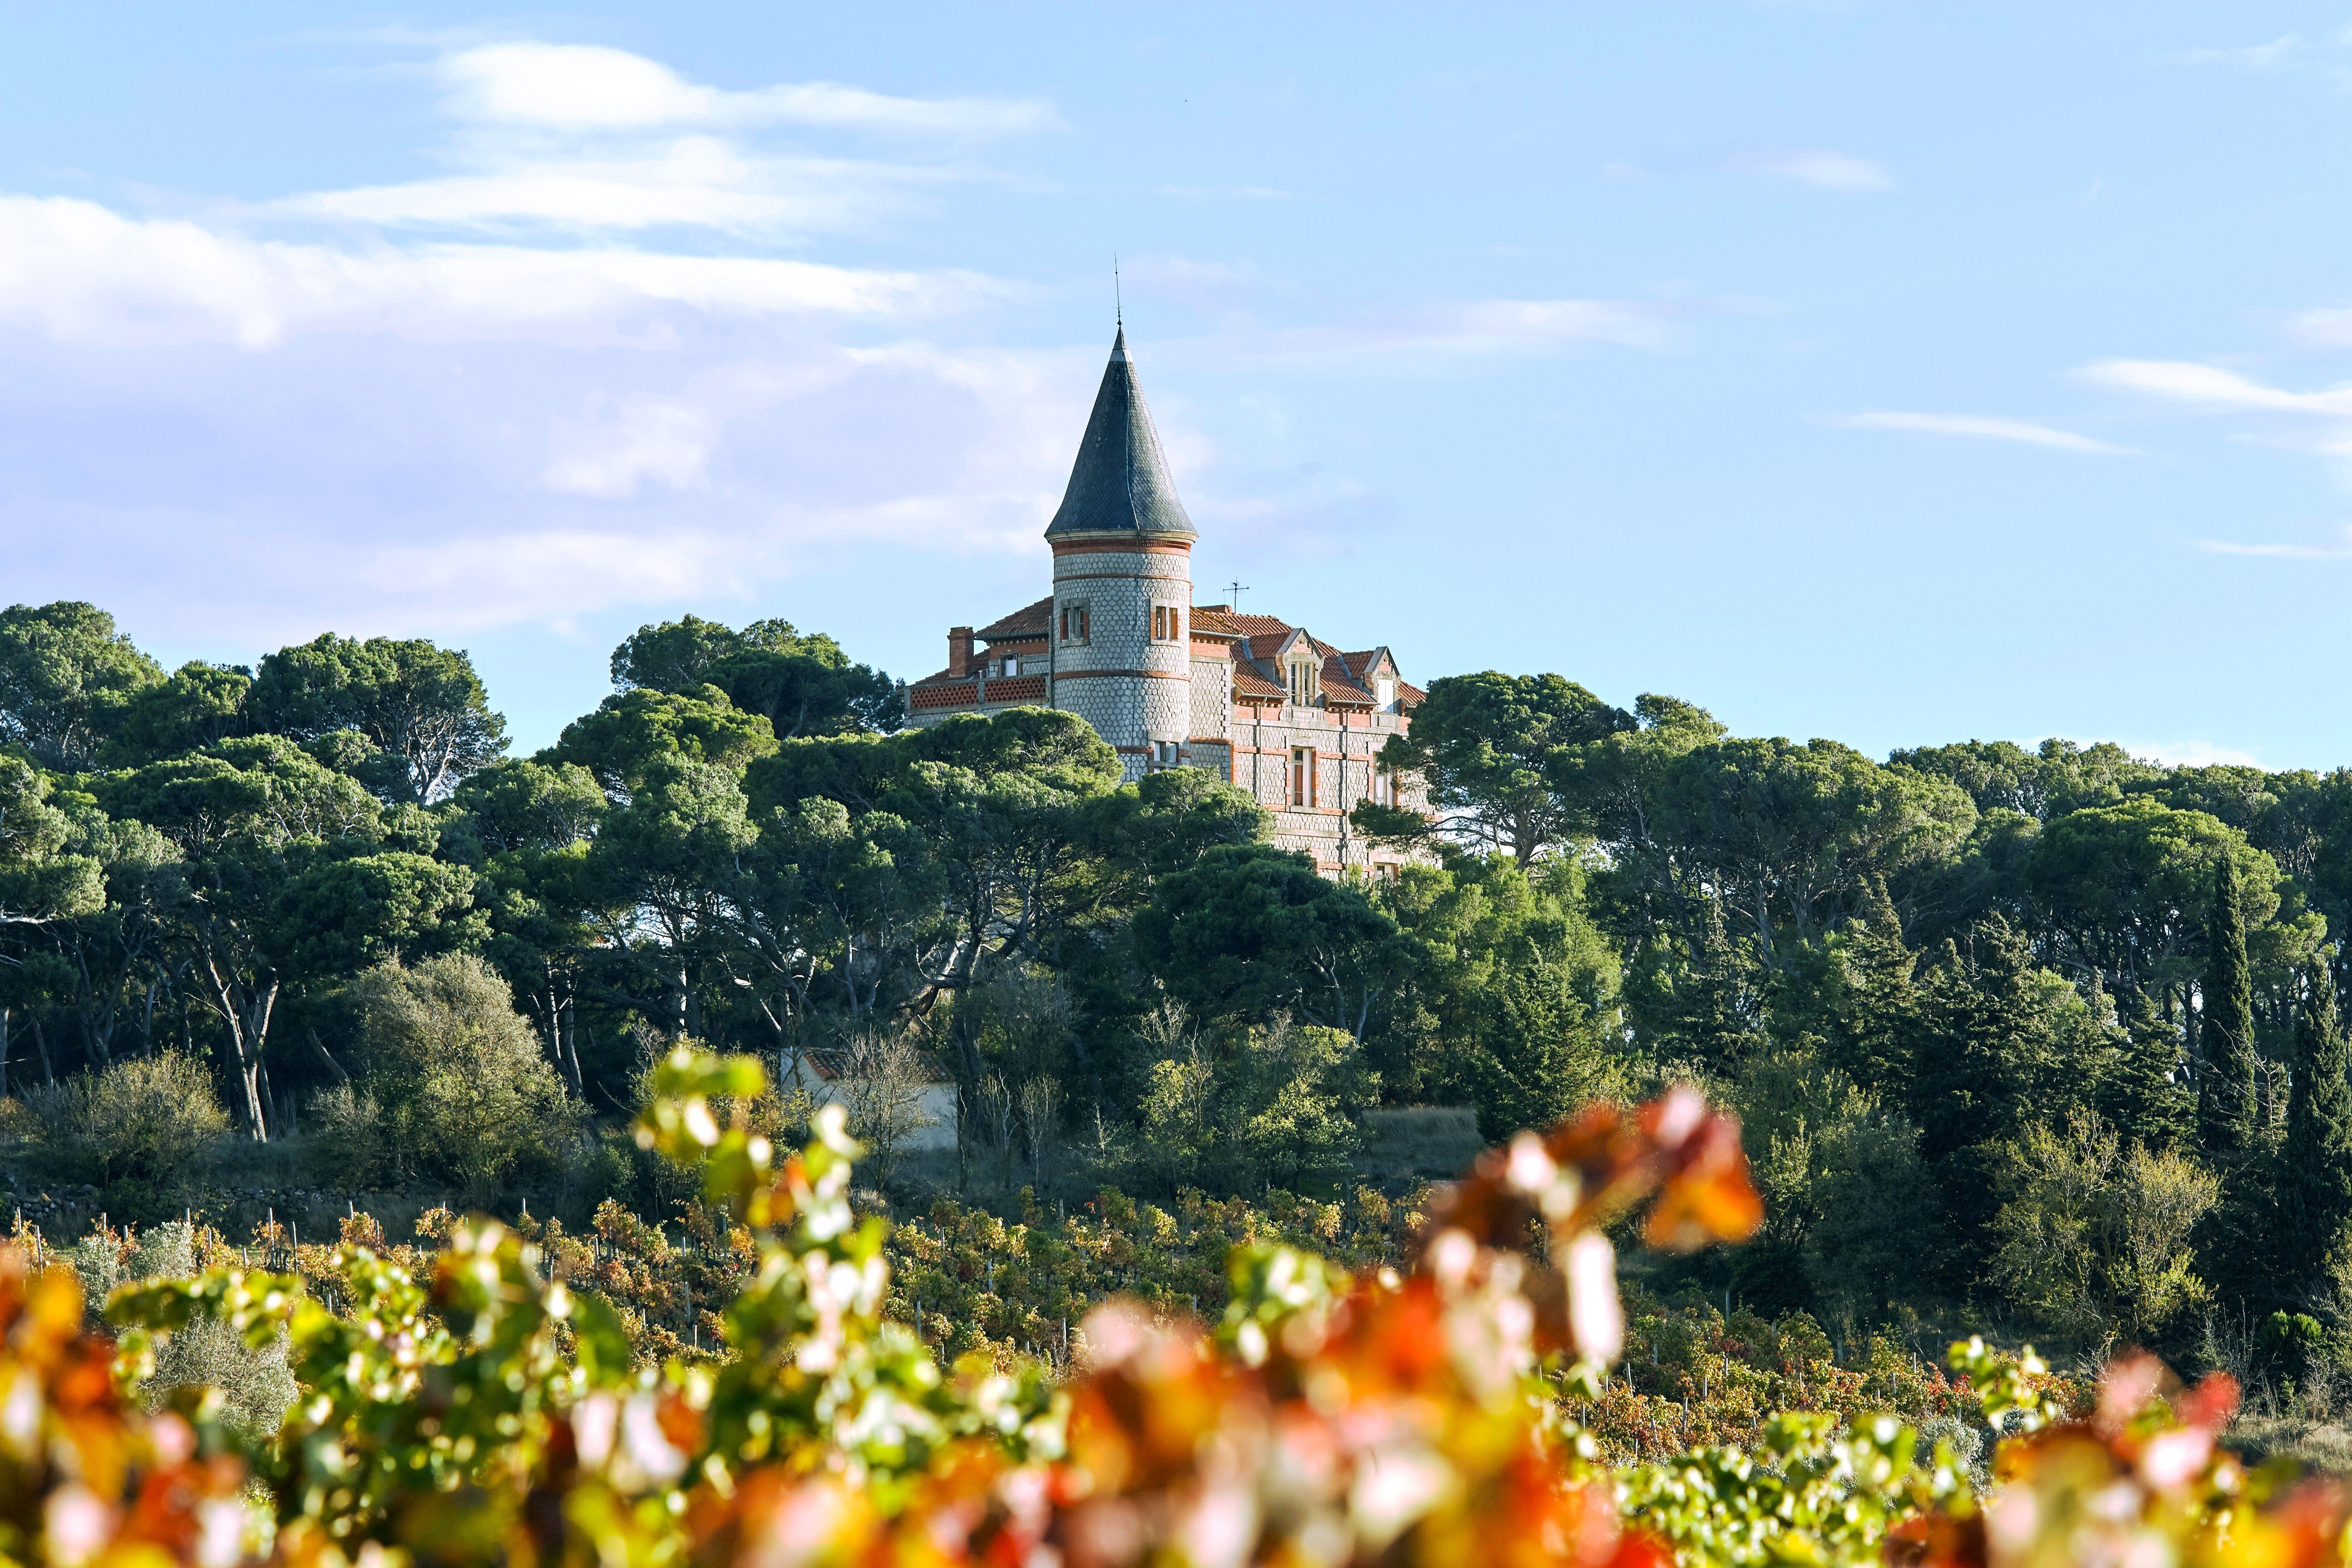 Chateau Capitoul, pictured, is the third vineyard to be restored to its former glory by O’Hanlon’s company, Domaine&Demeure. Photo: Courtesy of Domaine&Demeure.